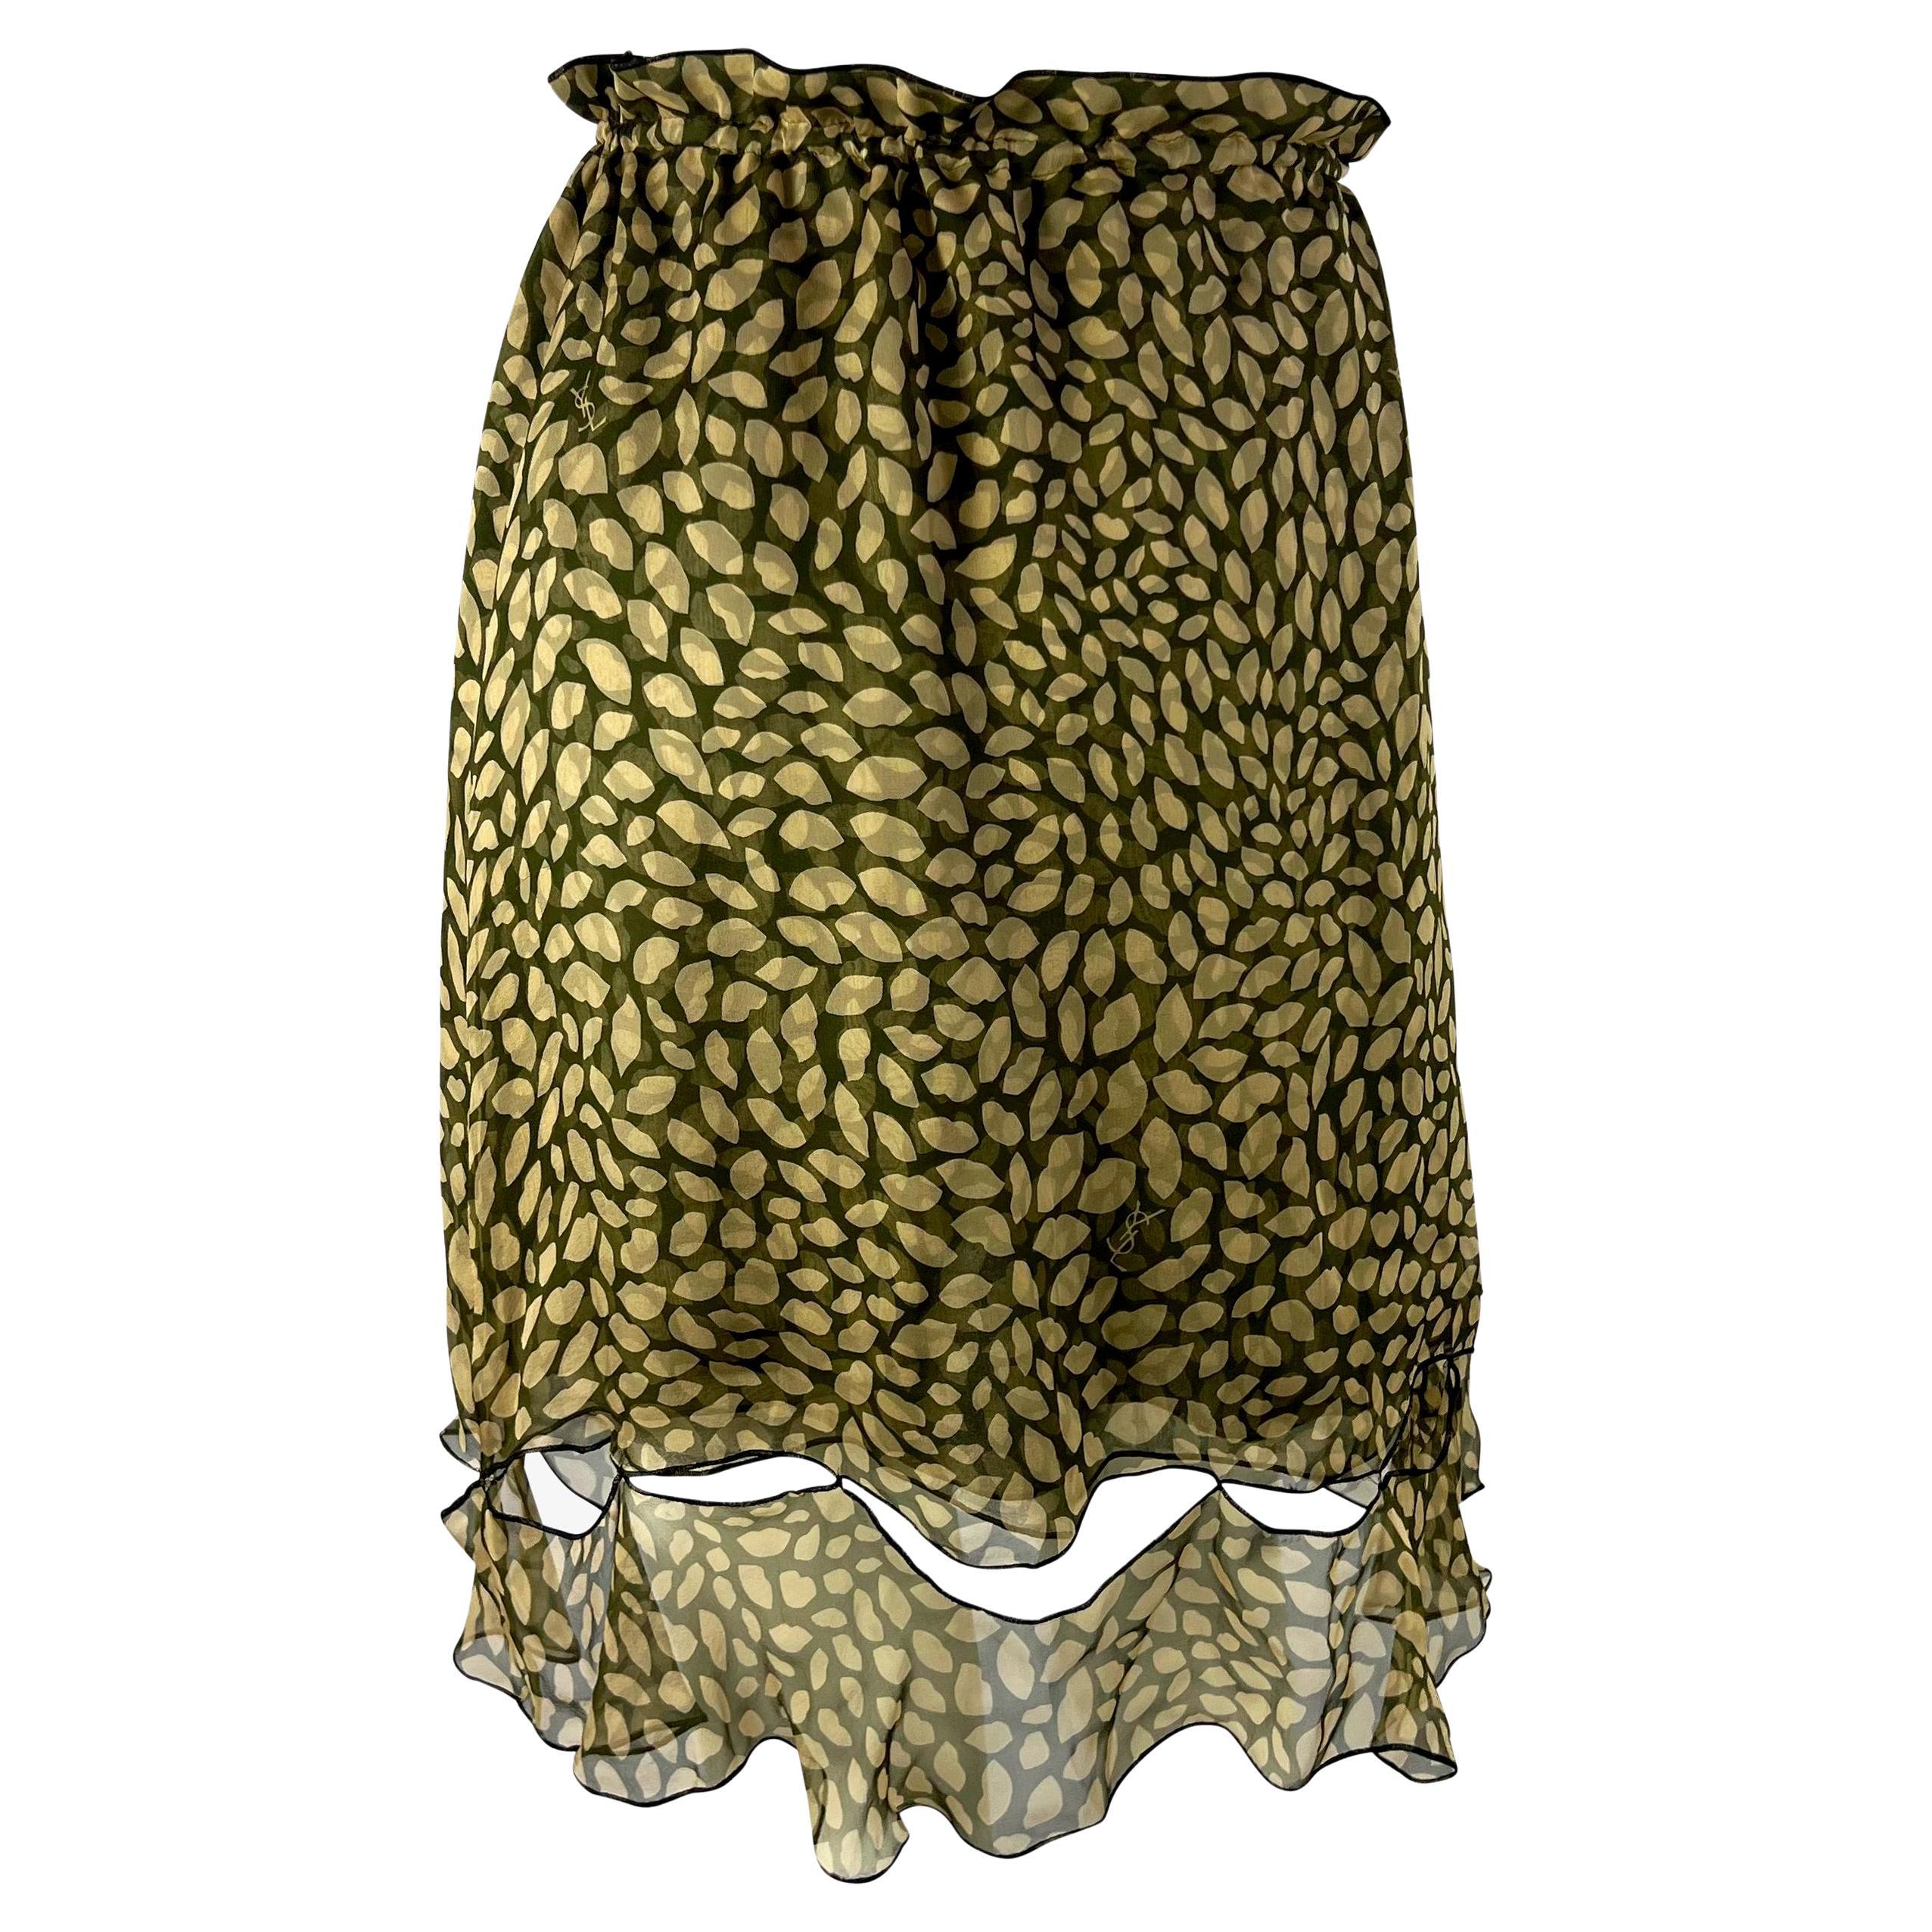 Resort 2005 Yves Saint Laurent Green Lip Logo Print Silk Chiffon Skirt In Excellent Condition For Sale In West Hollywood, CA